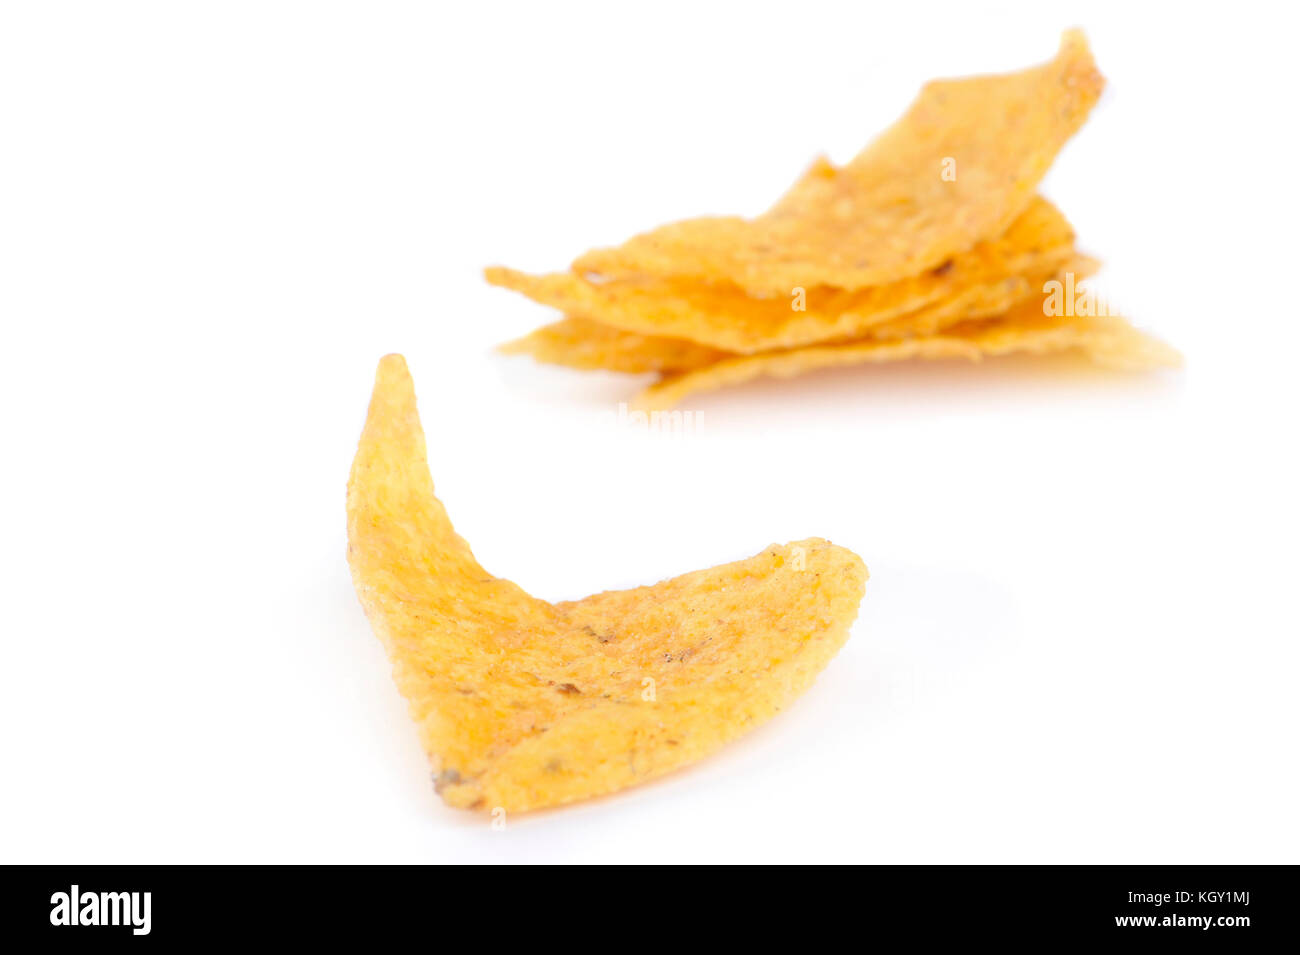 Tortilla chips isolated on white background Stock Photo